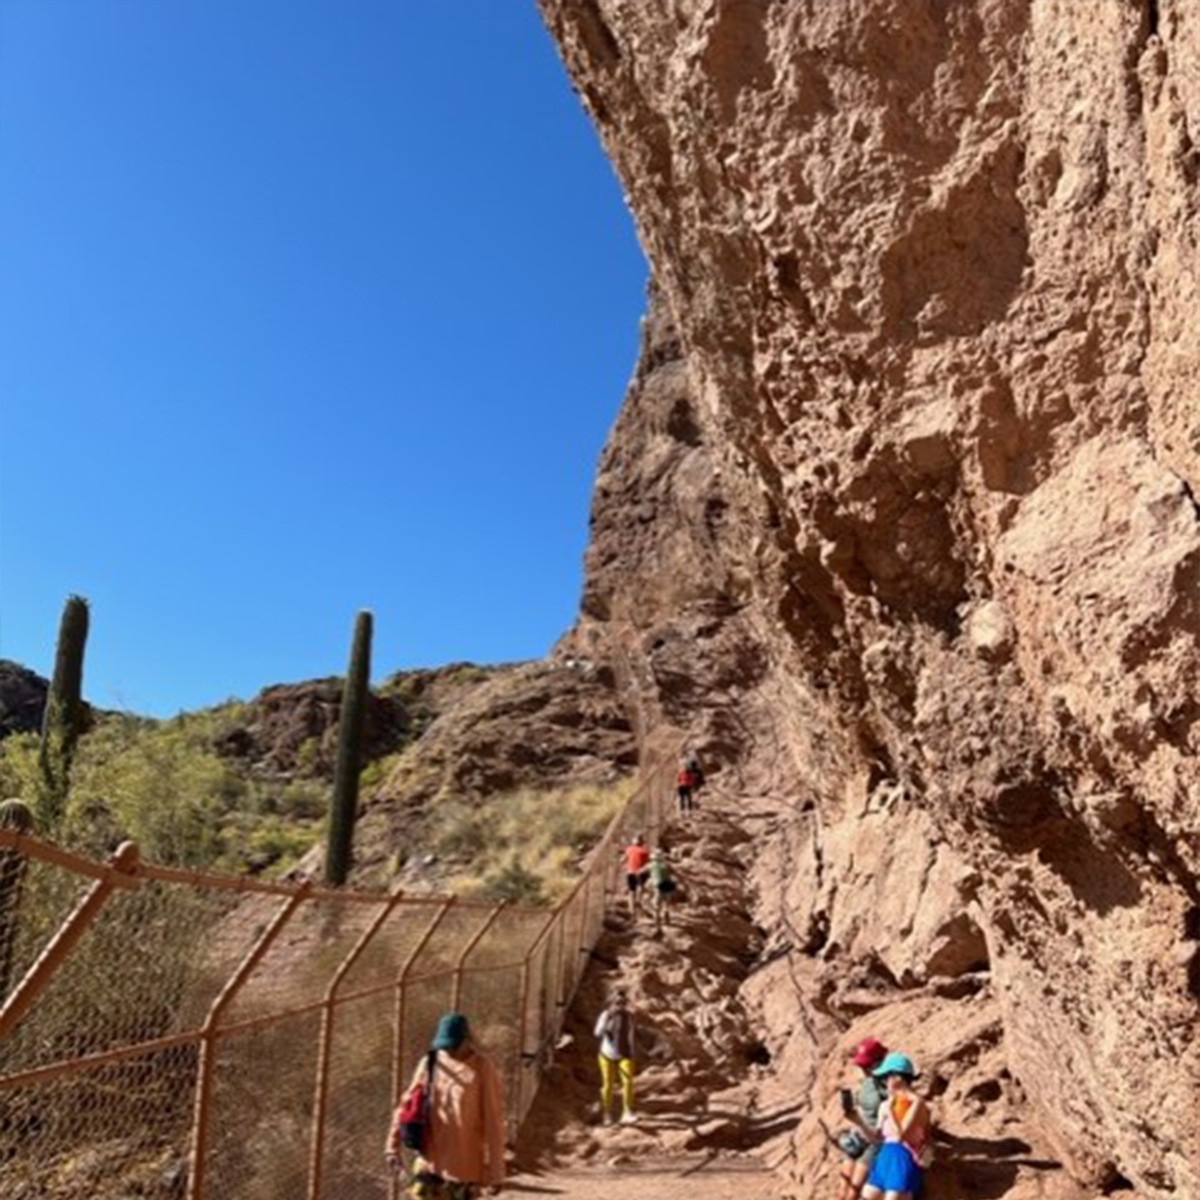 Bachelorette party hikes are perfect at Camelback Mountain.